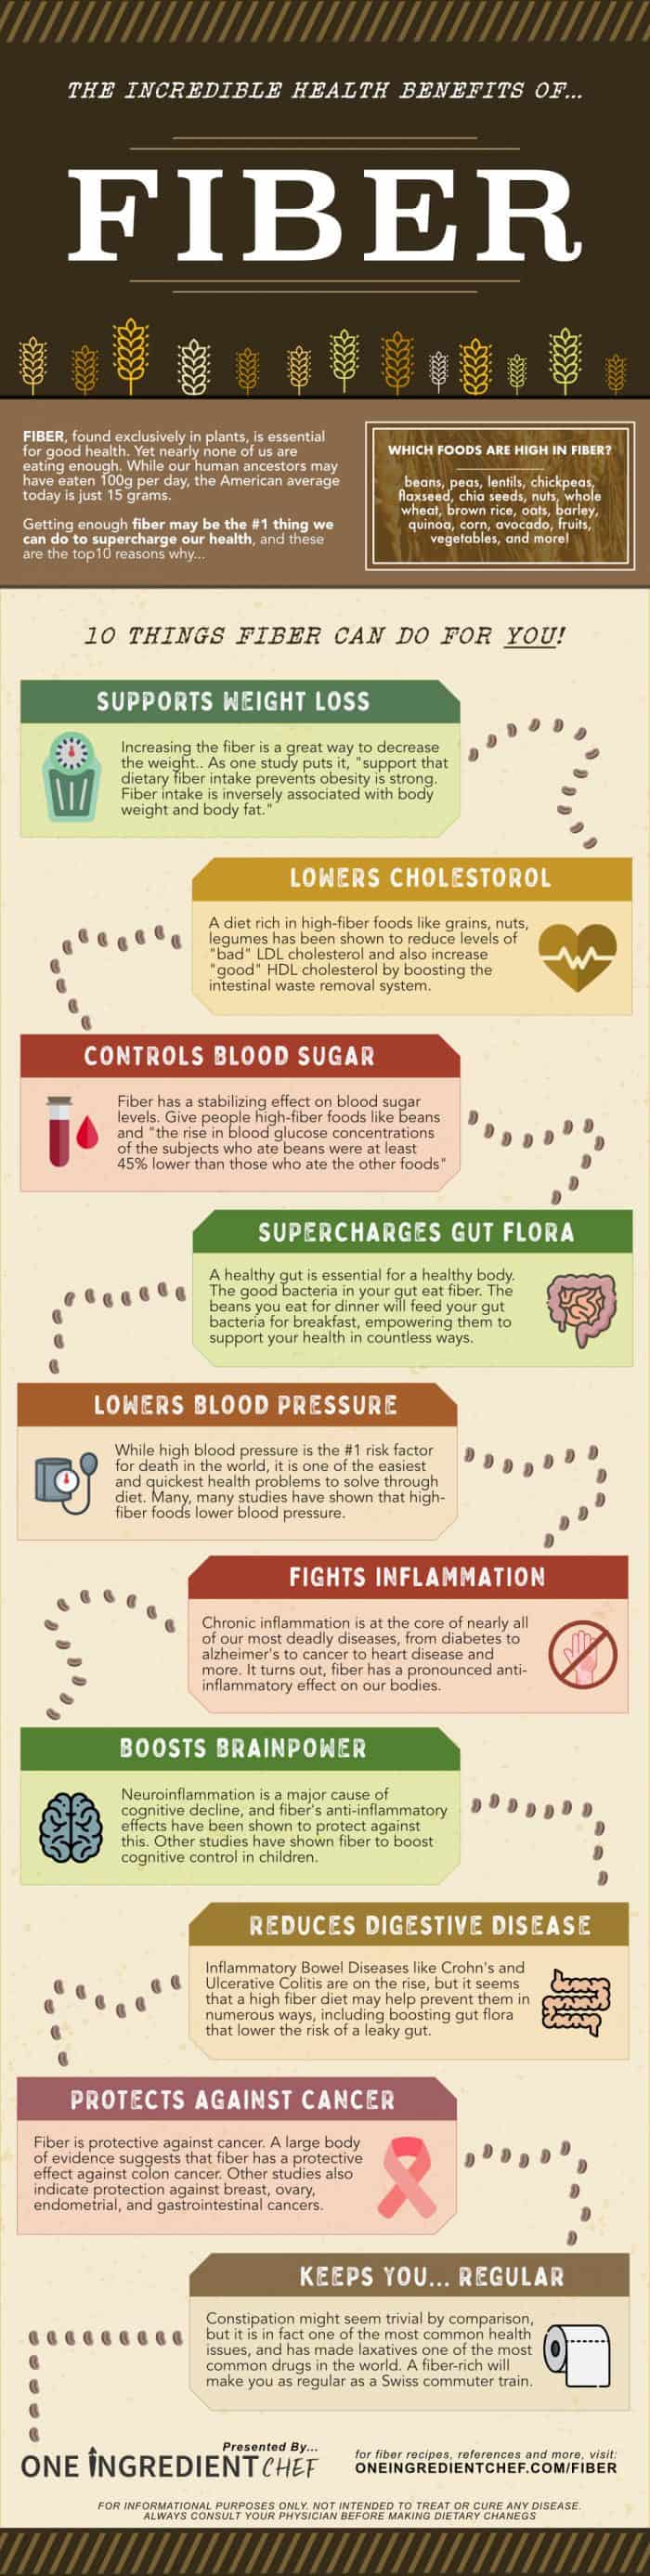 The multiple ways that fiber is beneficial to your health